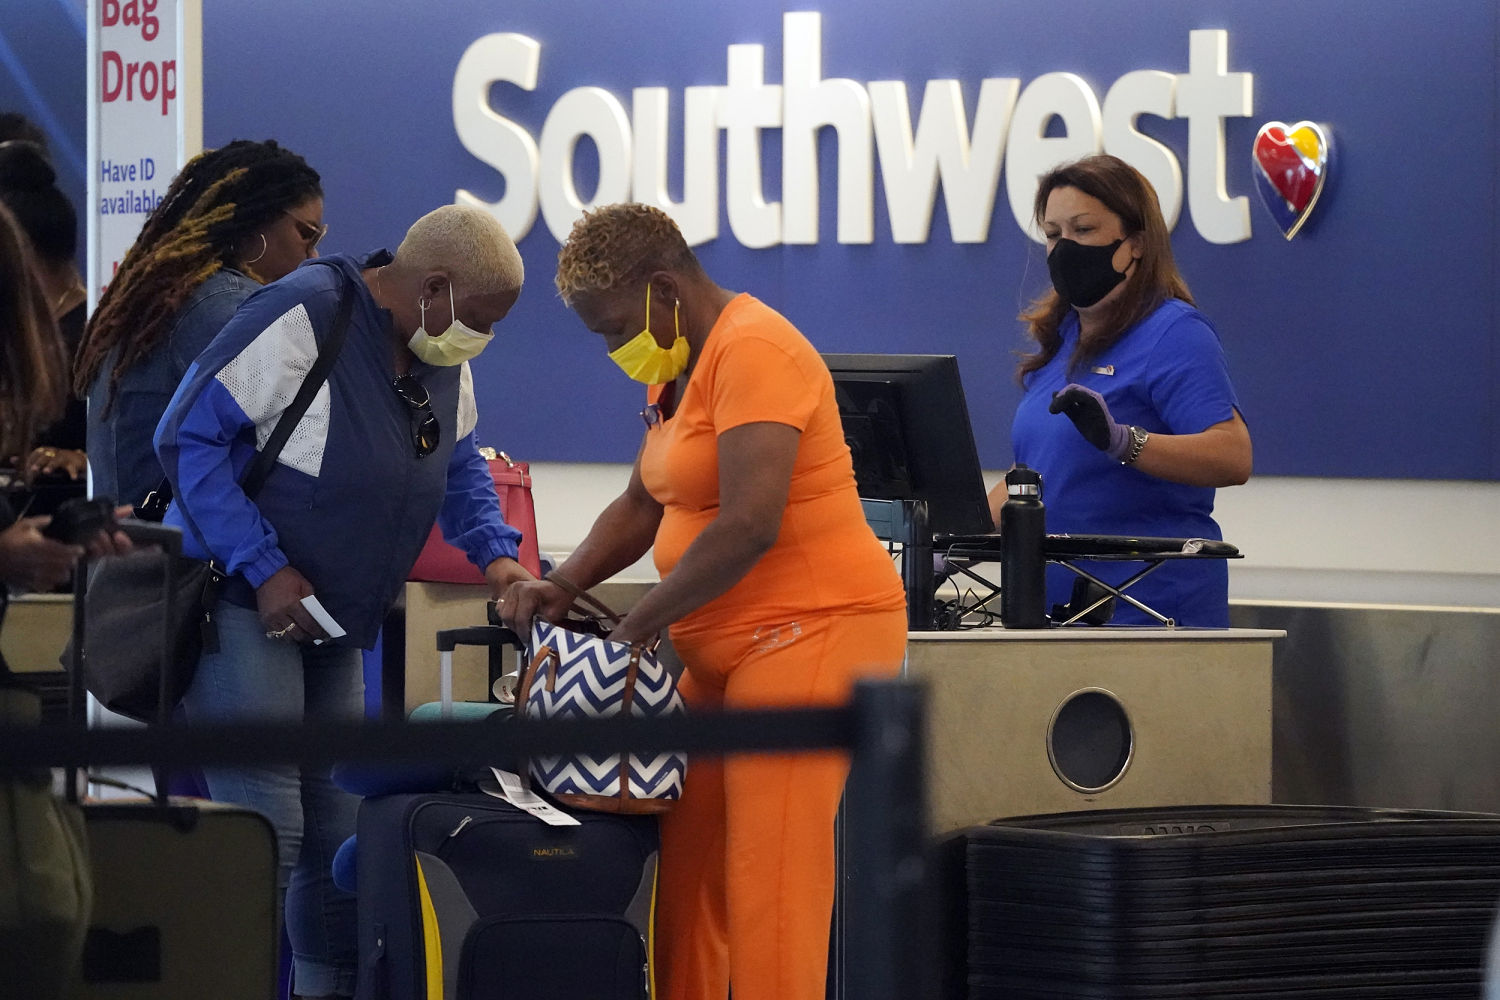 Open seating no more? Southwest CEO says airline is weighing cabin changes